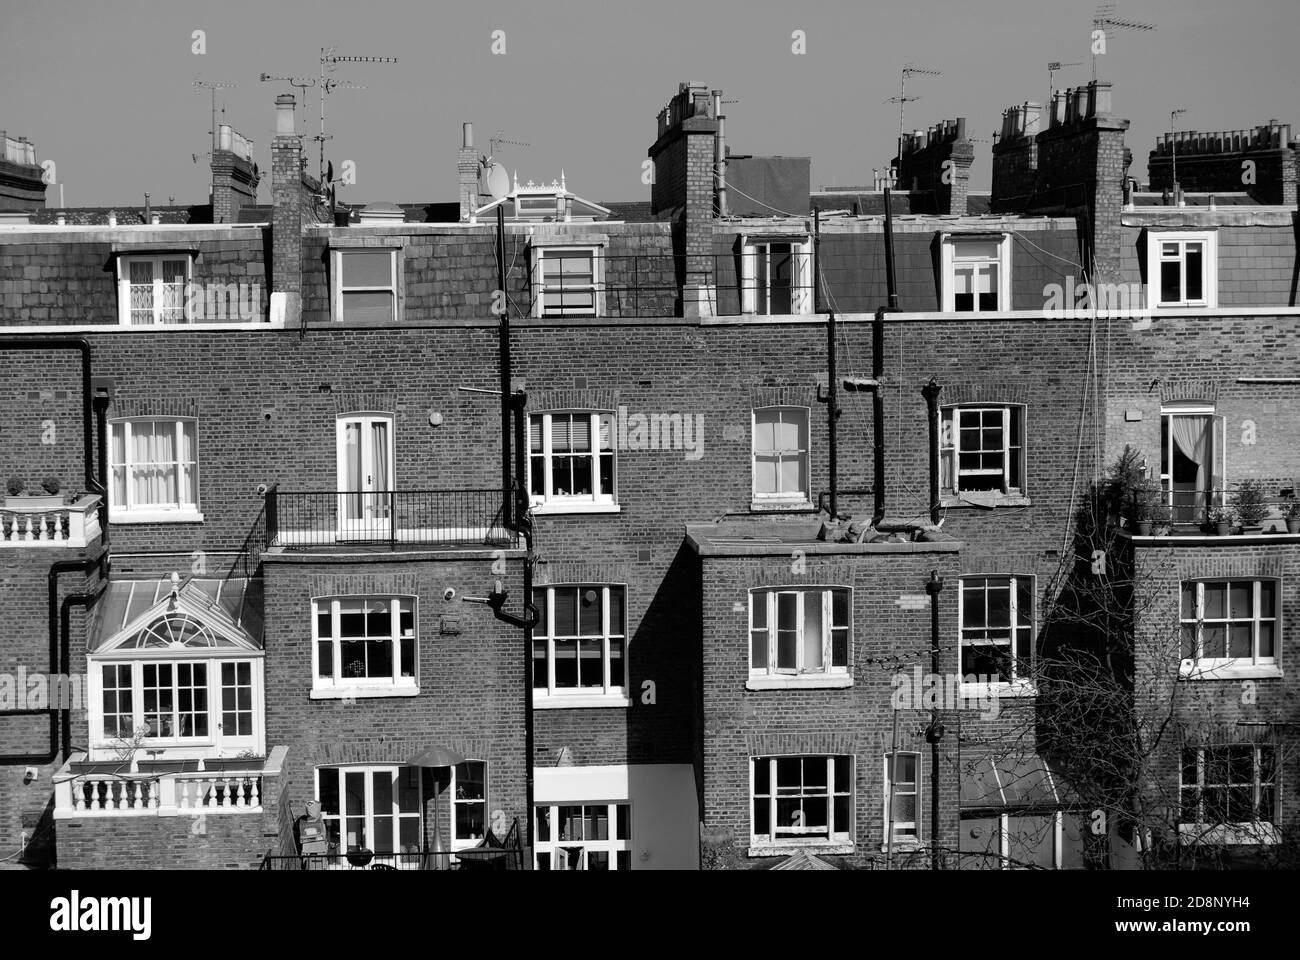 Housing Black and White Stock Photos & Images - Alamy